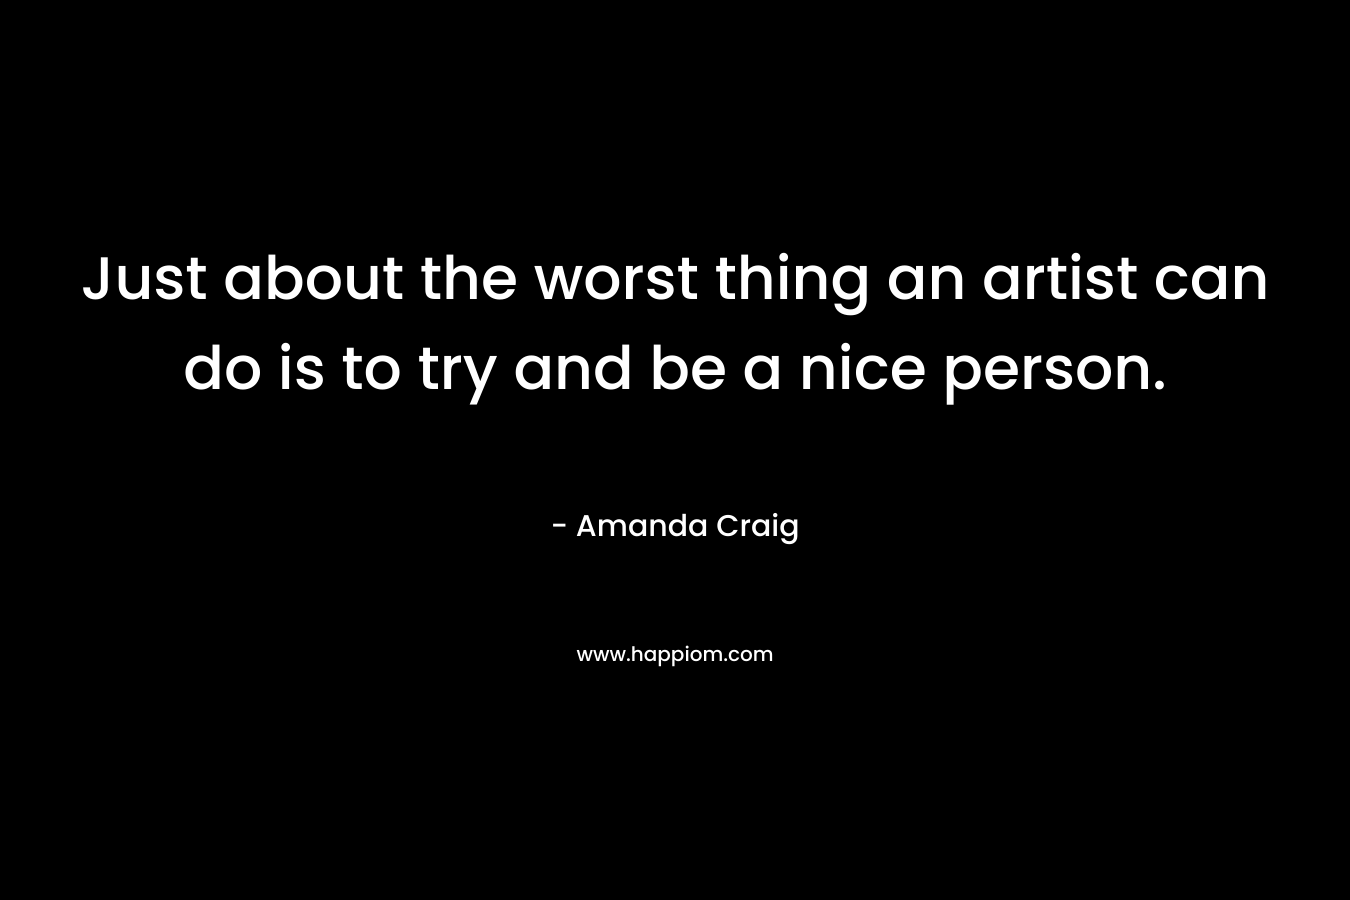 Just about the worst thing an artist can do is to try and be a nice person. – Amanda Craig